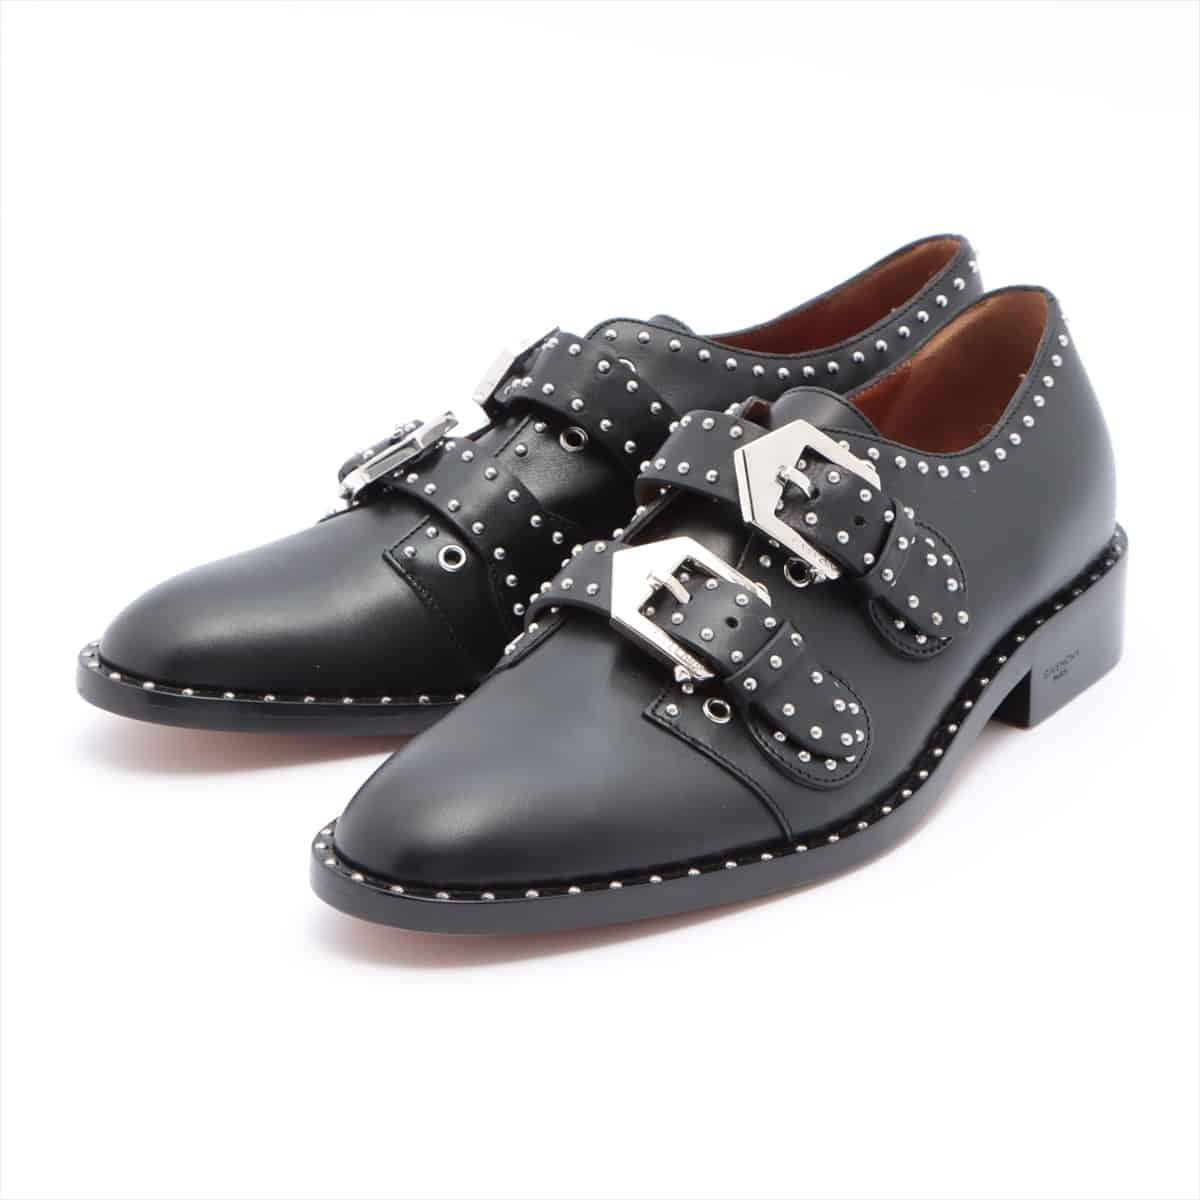 Givenchy Leather Leather shoes 39 Men's Black Studs